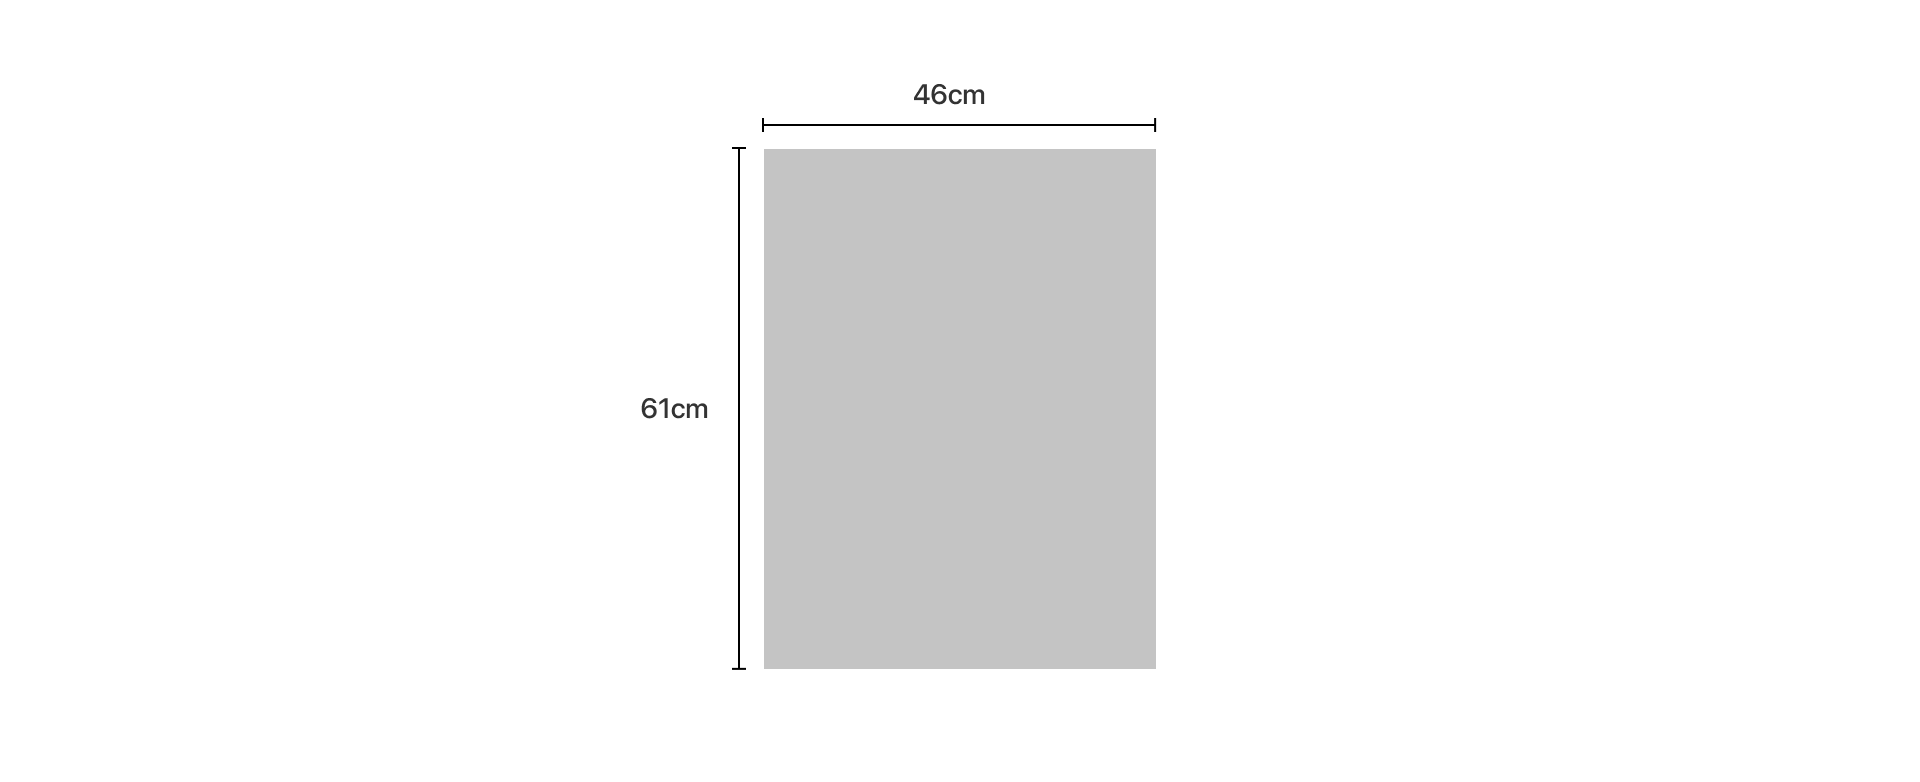 Simple graphic of a rectangle with dimensions 46cm by 61cm